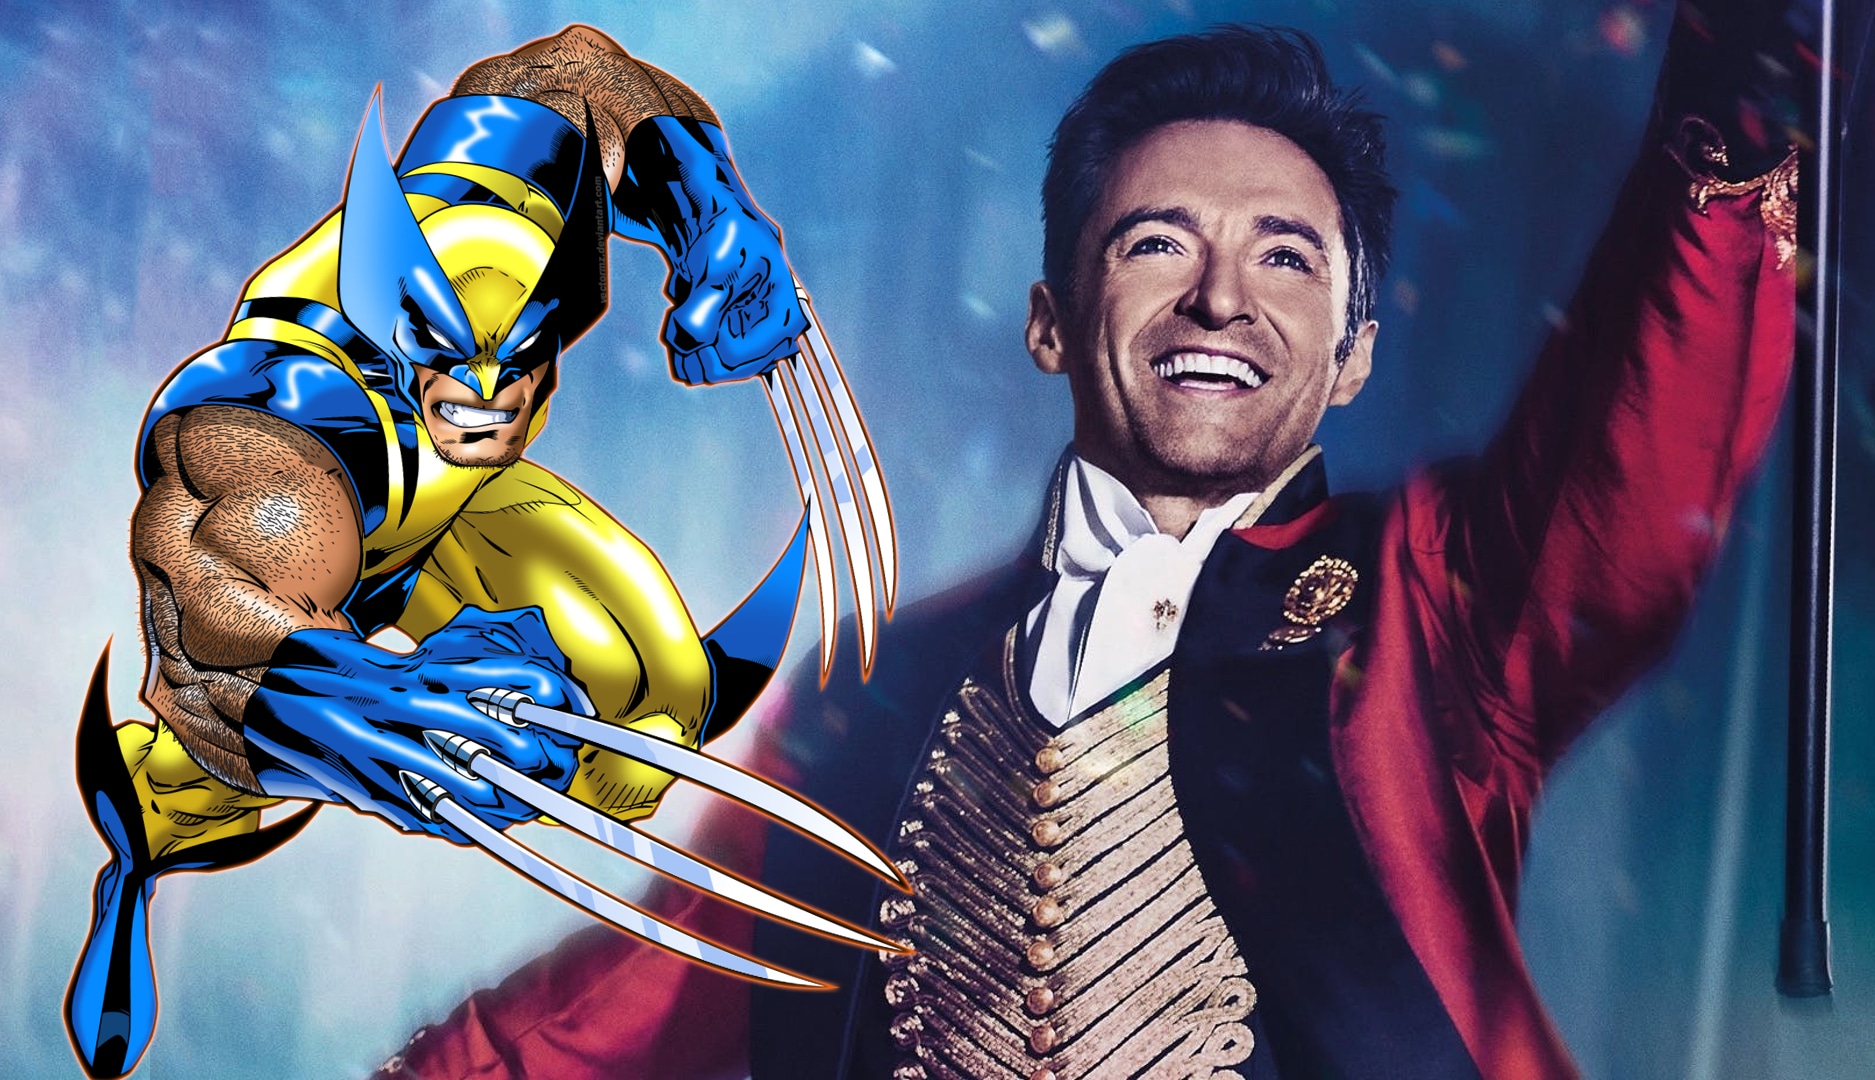 wolverine easter egg the greatest showman AT